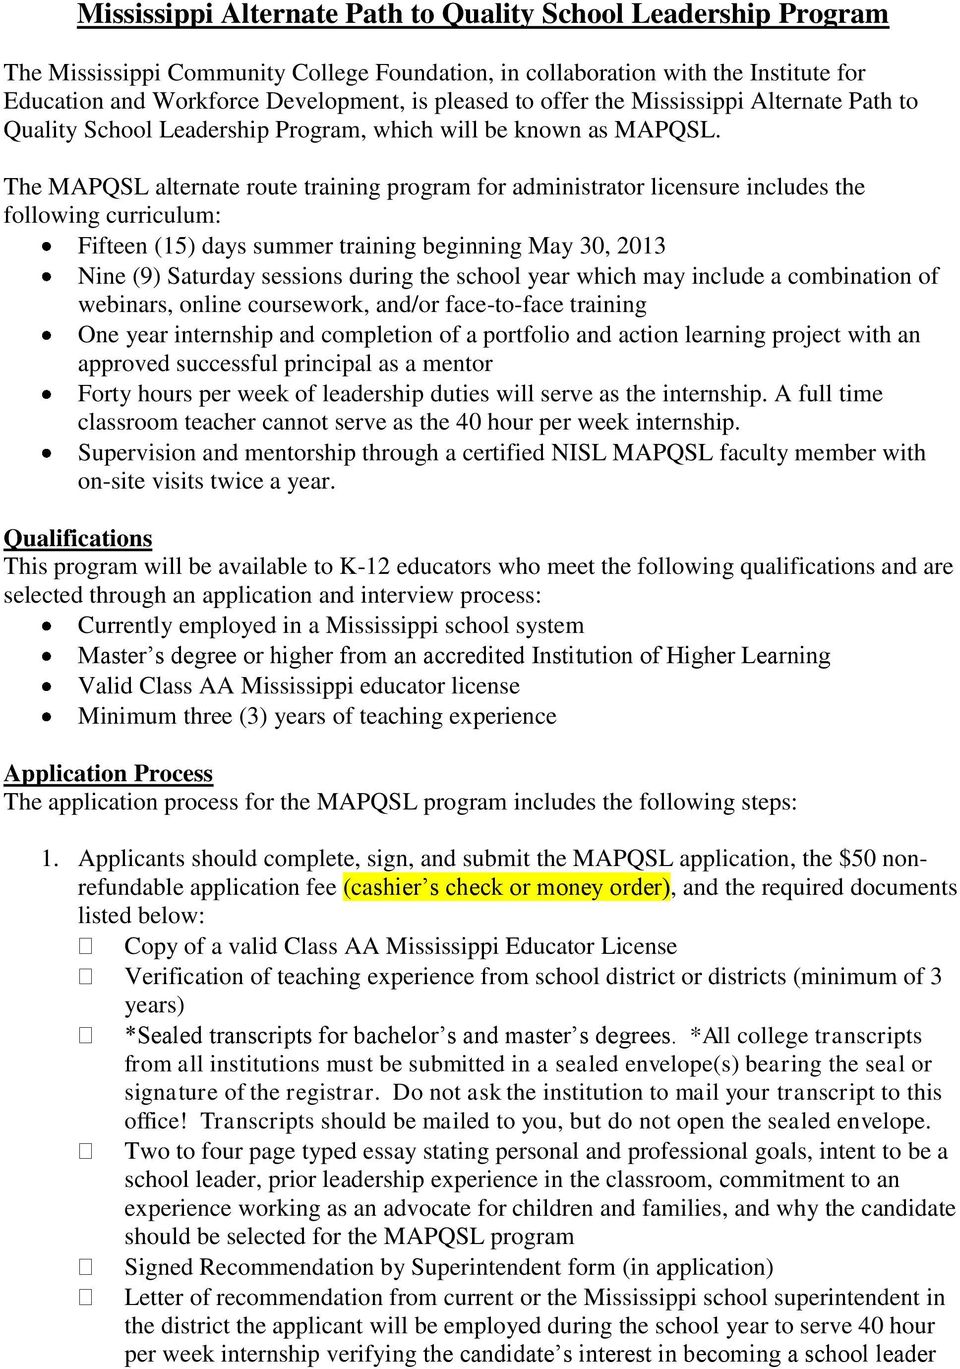 The MAPQSL alternate route training program for administrator licensure includes the following curriculum: Fifteen (15) days summer training beginning May 30, 2013 Nine (9) Saturday sessions during